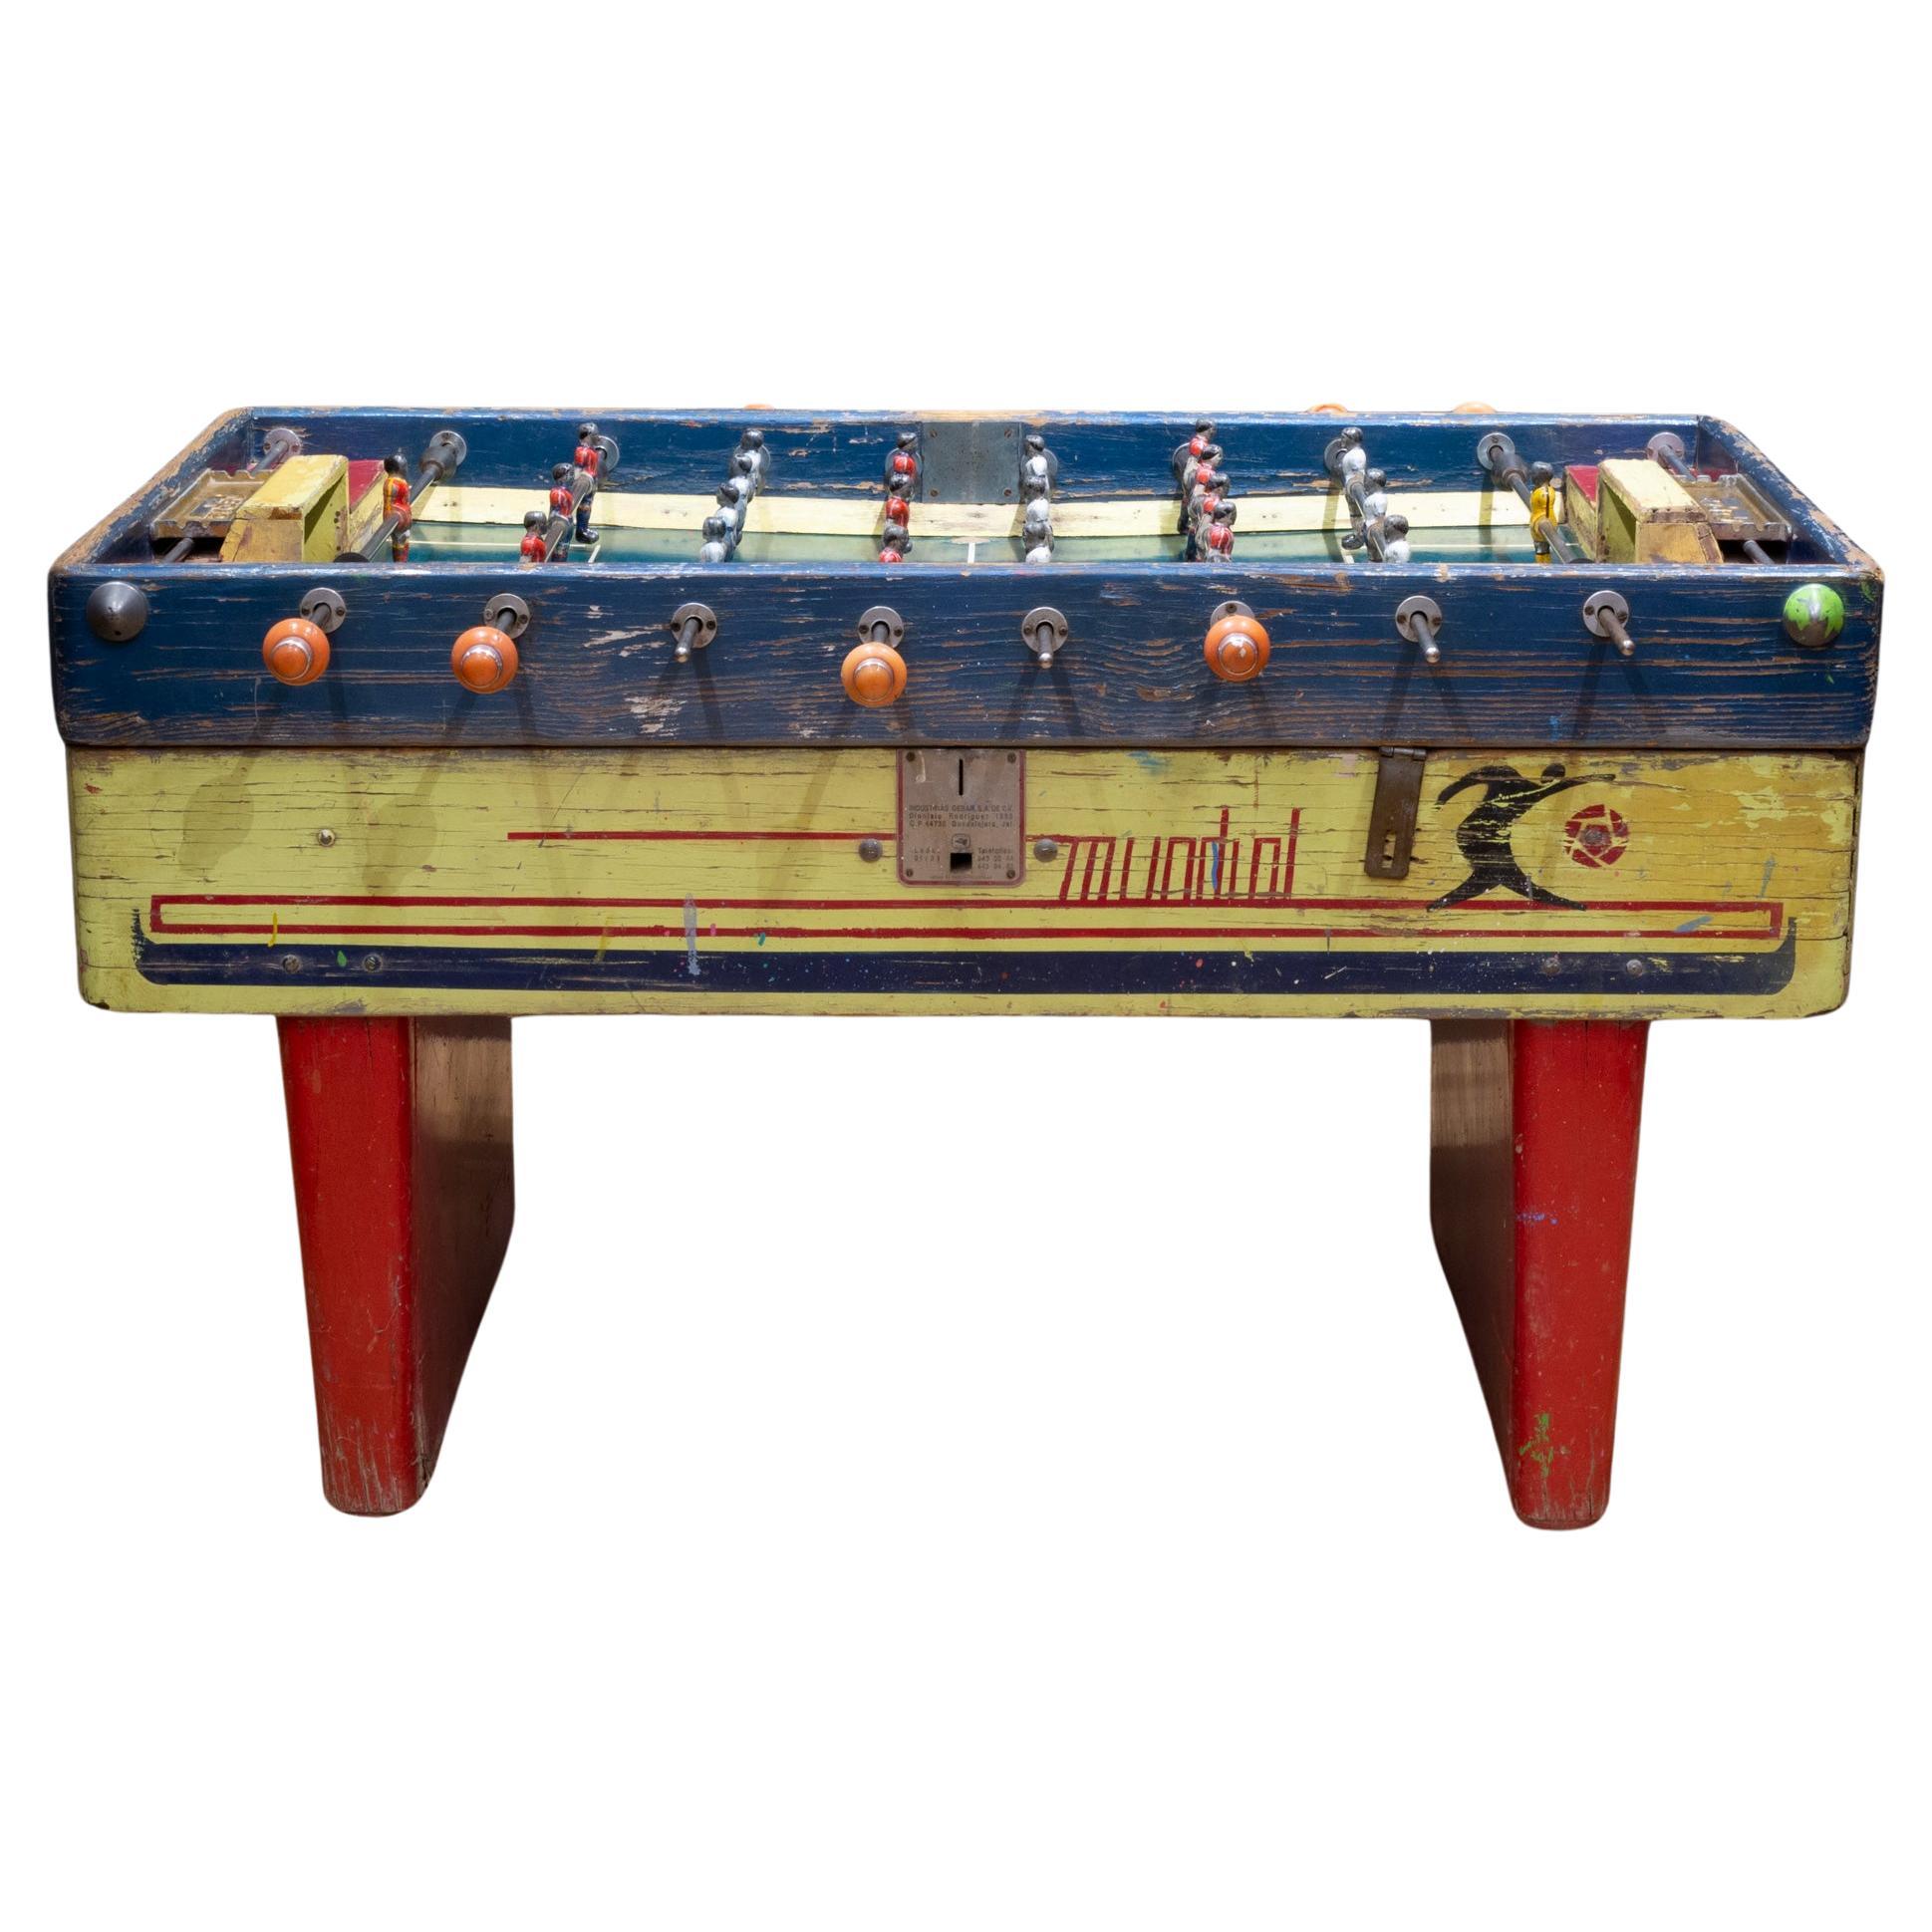 Vintage Mexican Foosball Table with Metal Players, circa 1940-1970 For Sale